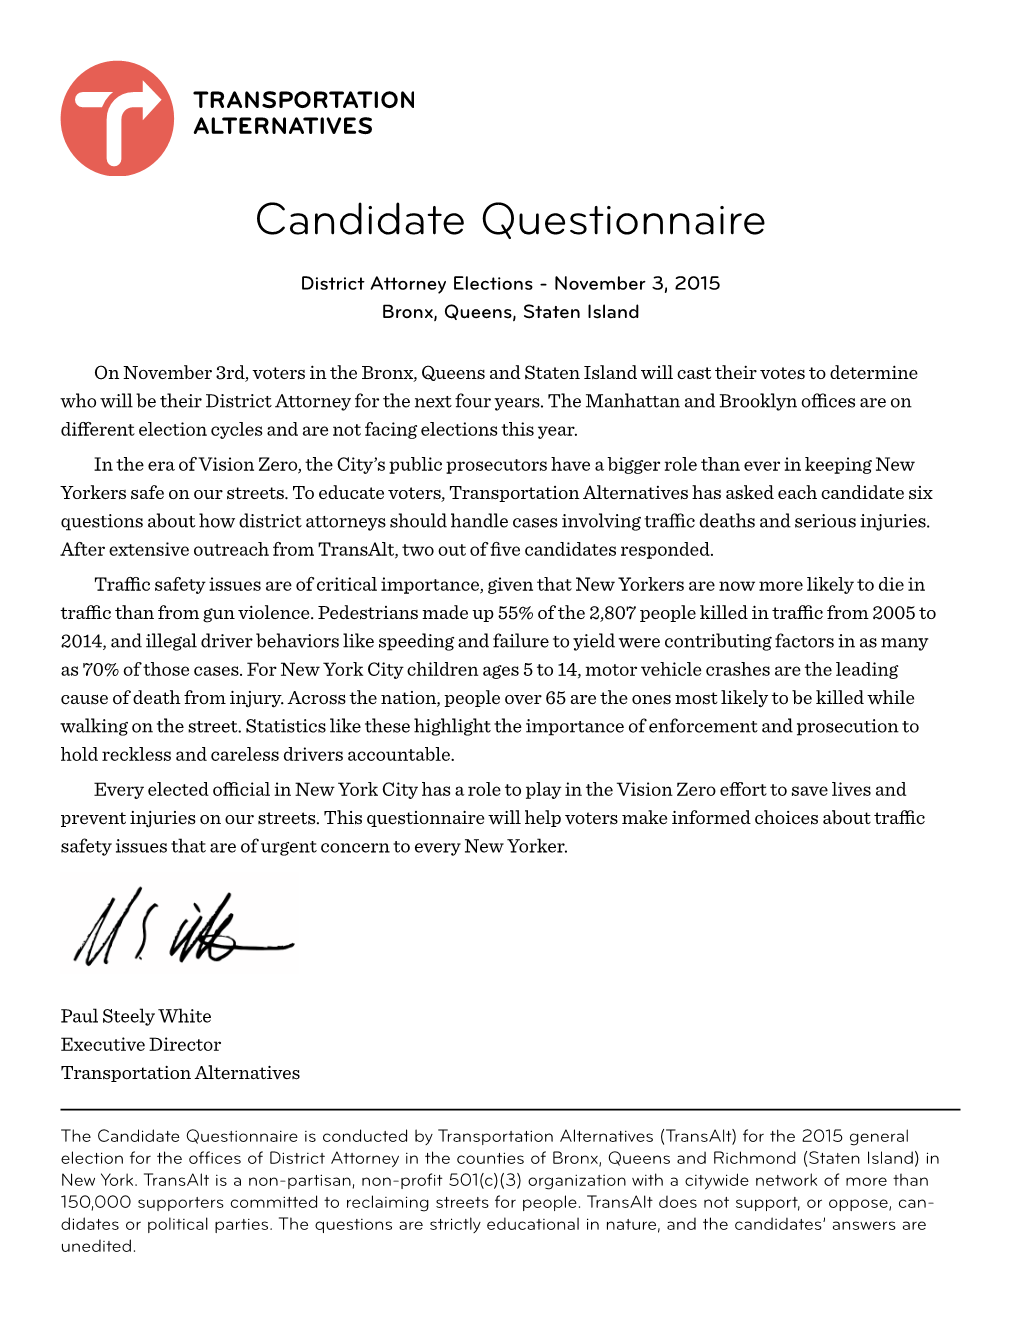 District Attorney Candidate Questionnaire